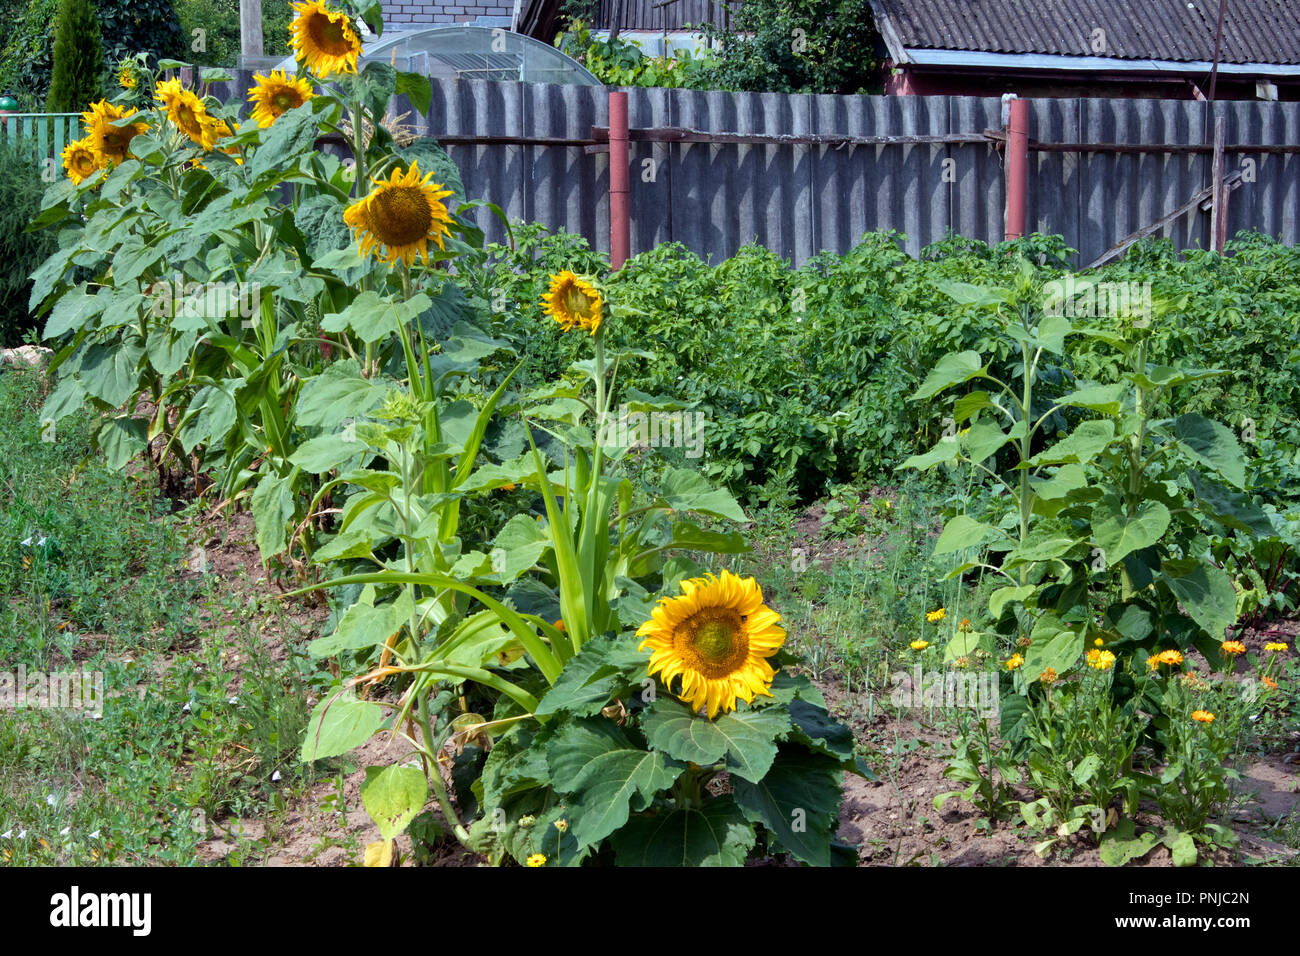 Garden bed with sunflowers growing in a kale yard near rural fence Stock Photo